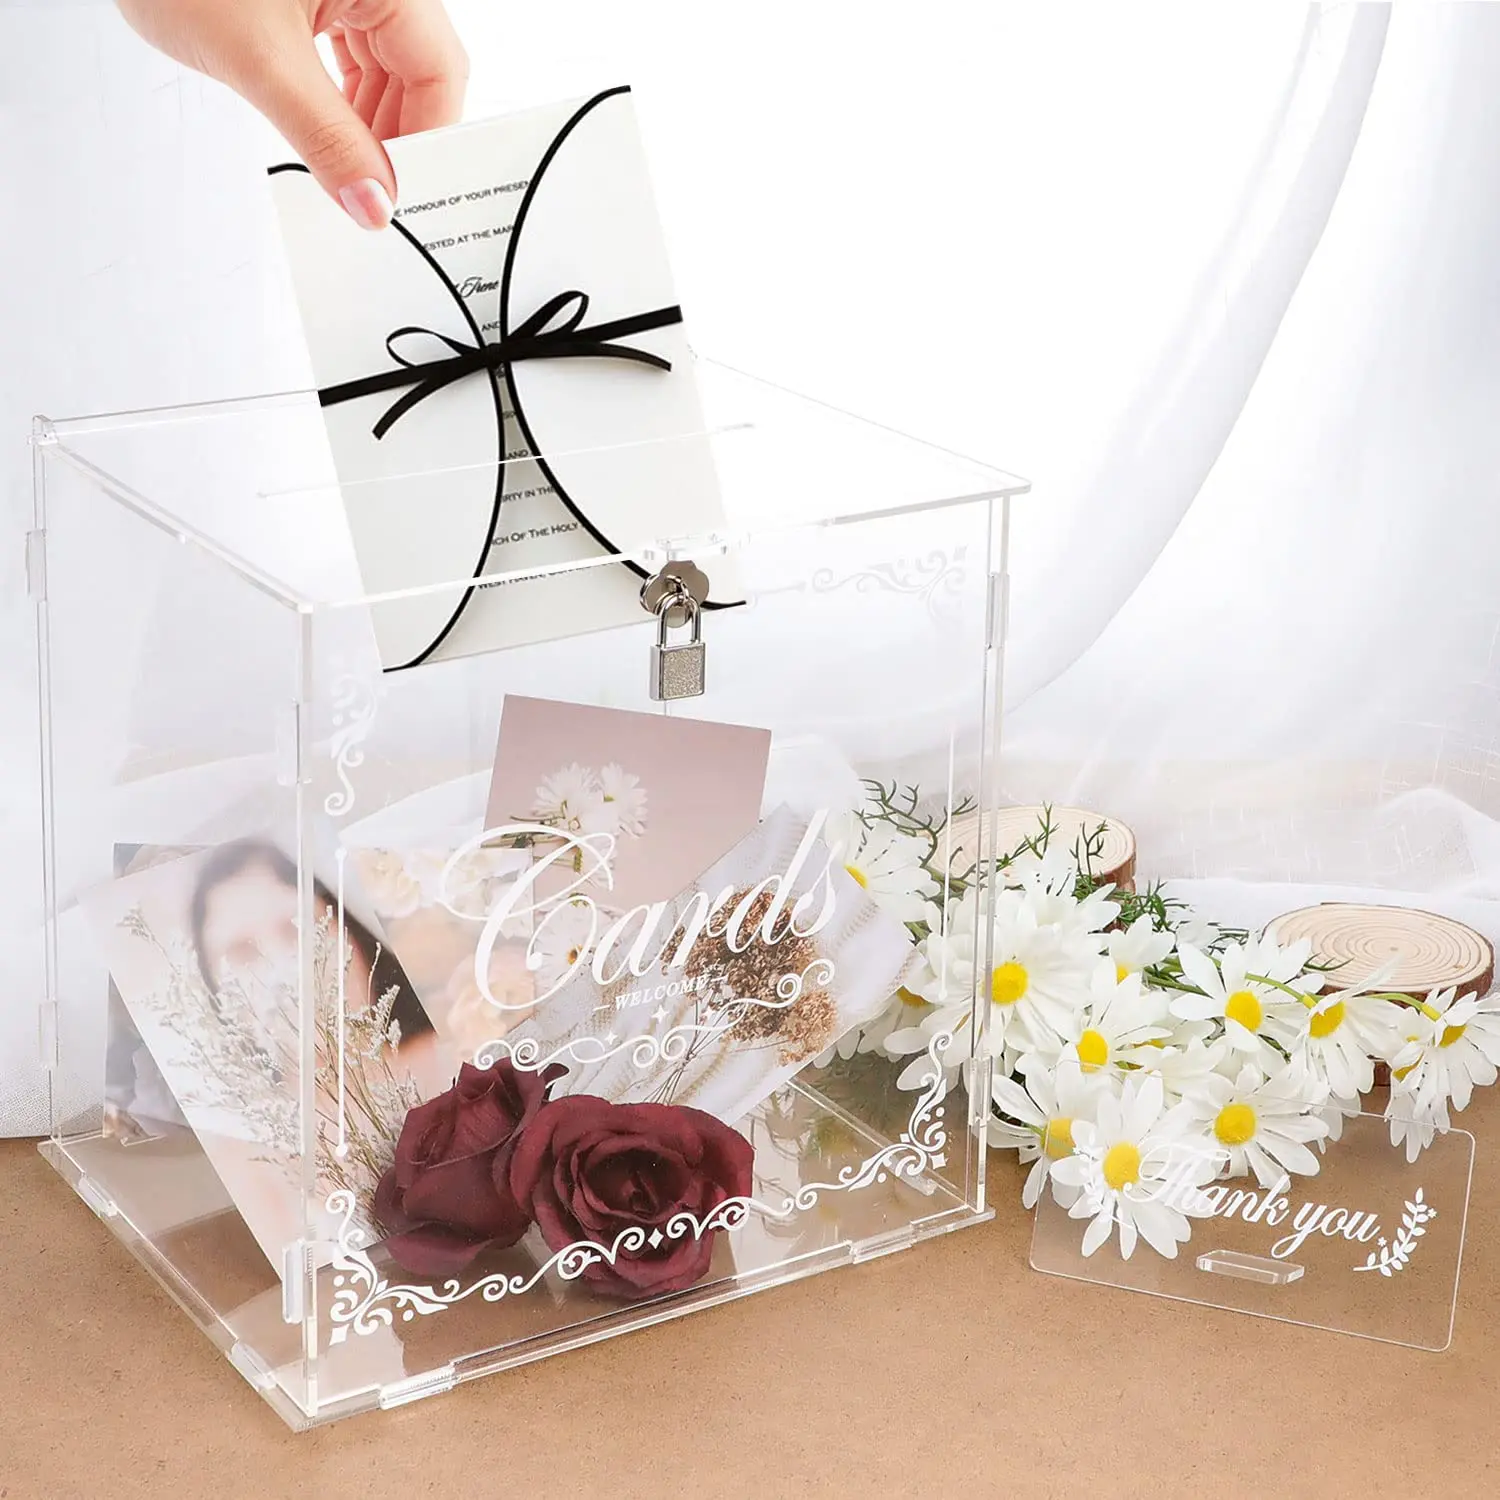 JupDec Clear Wedding Card Box Acrylic for Reception with Slot, 10 x 10 x 6 Large Advice Gift Envelope Holder, Elegant Hone